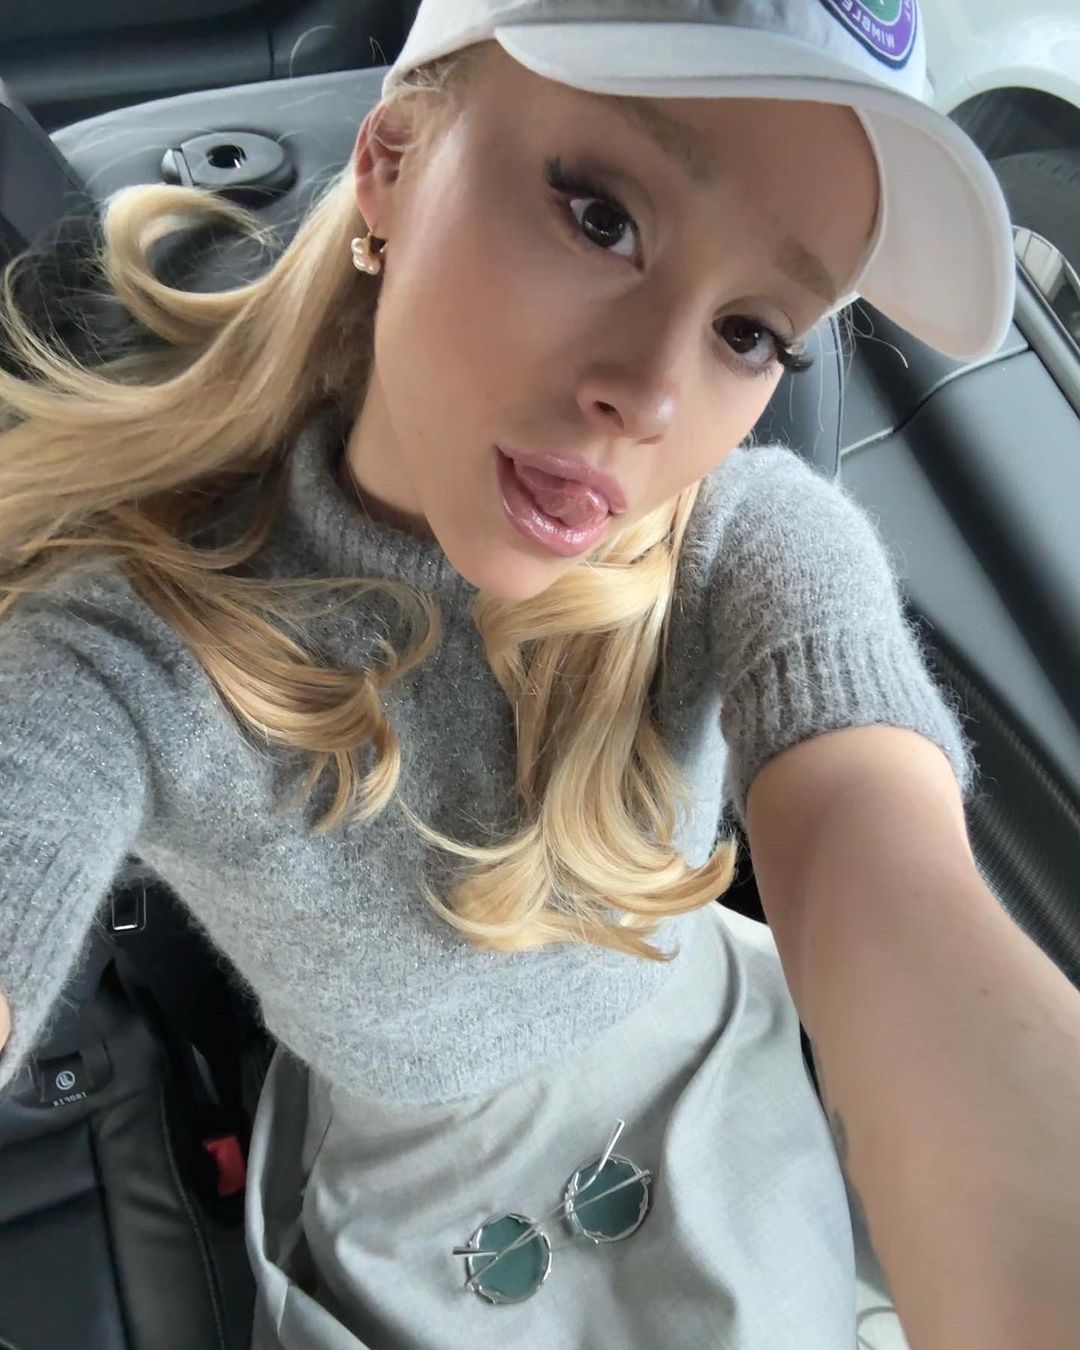 <p>In a September 2023 Vogue "Beauty Secrets" video, <a href="https://www.wonderwall.com/celebrity/profiles/overview/ariana-grande-1540.article">Ariana Grande</a> -- seen here in July 2023 just days after she turned 30 -- said that although she'd stopped getting fillers and Botox five years earlier, she's not opposed to trying them again at some point.</p><p>"Maybe I'll start again one day -- to each their own. Whatever makes you feel beautiful. I do support," she said, "but I know for me I was just like, 'Oh, I want to see my well-earned cry lines and smile lines. I hope my smile lines get deeper and deeper and I laugh more and more, and I just think aging can be such a beautiful thing."</p><p>However, she added, "Might I get a face lift in 10 years? [I] might."</p><p>MORE: <a href="https://www.wonderwall.com/celebrity/photos/celebrities-without-facial-hair-mustache-beard-clean-shaven-photos-3016858.gallery">Male stars with and without facial hair</a></p>